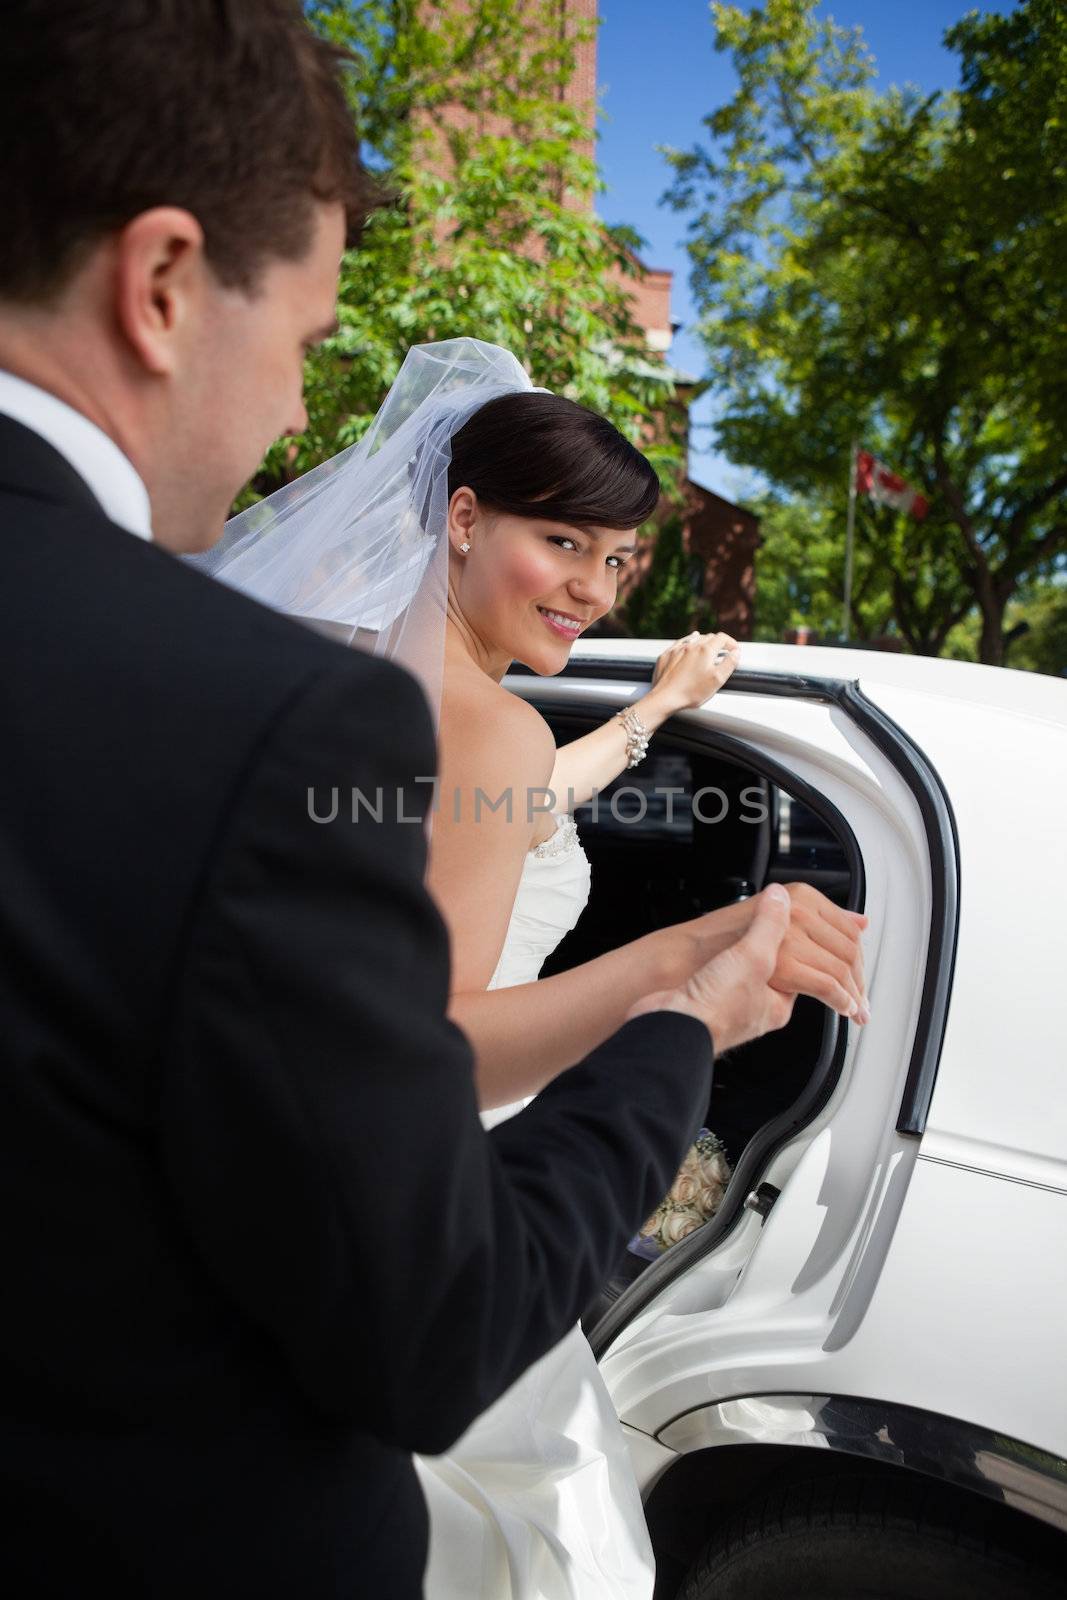 Bride and Groom with Limo by leaf